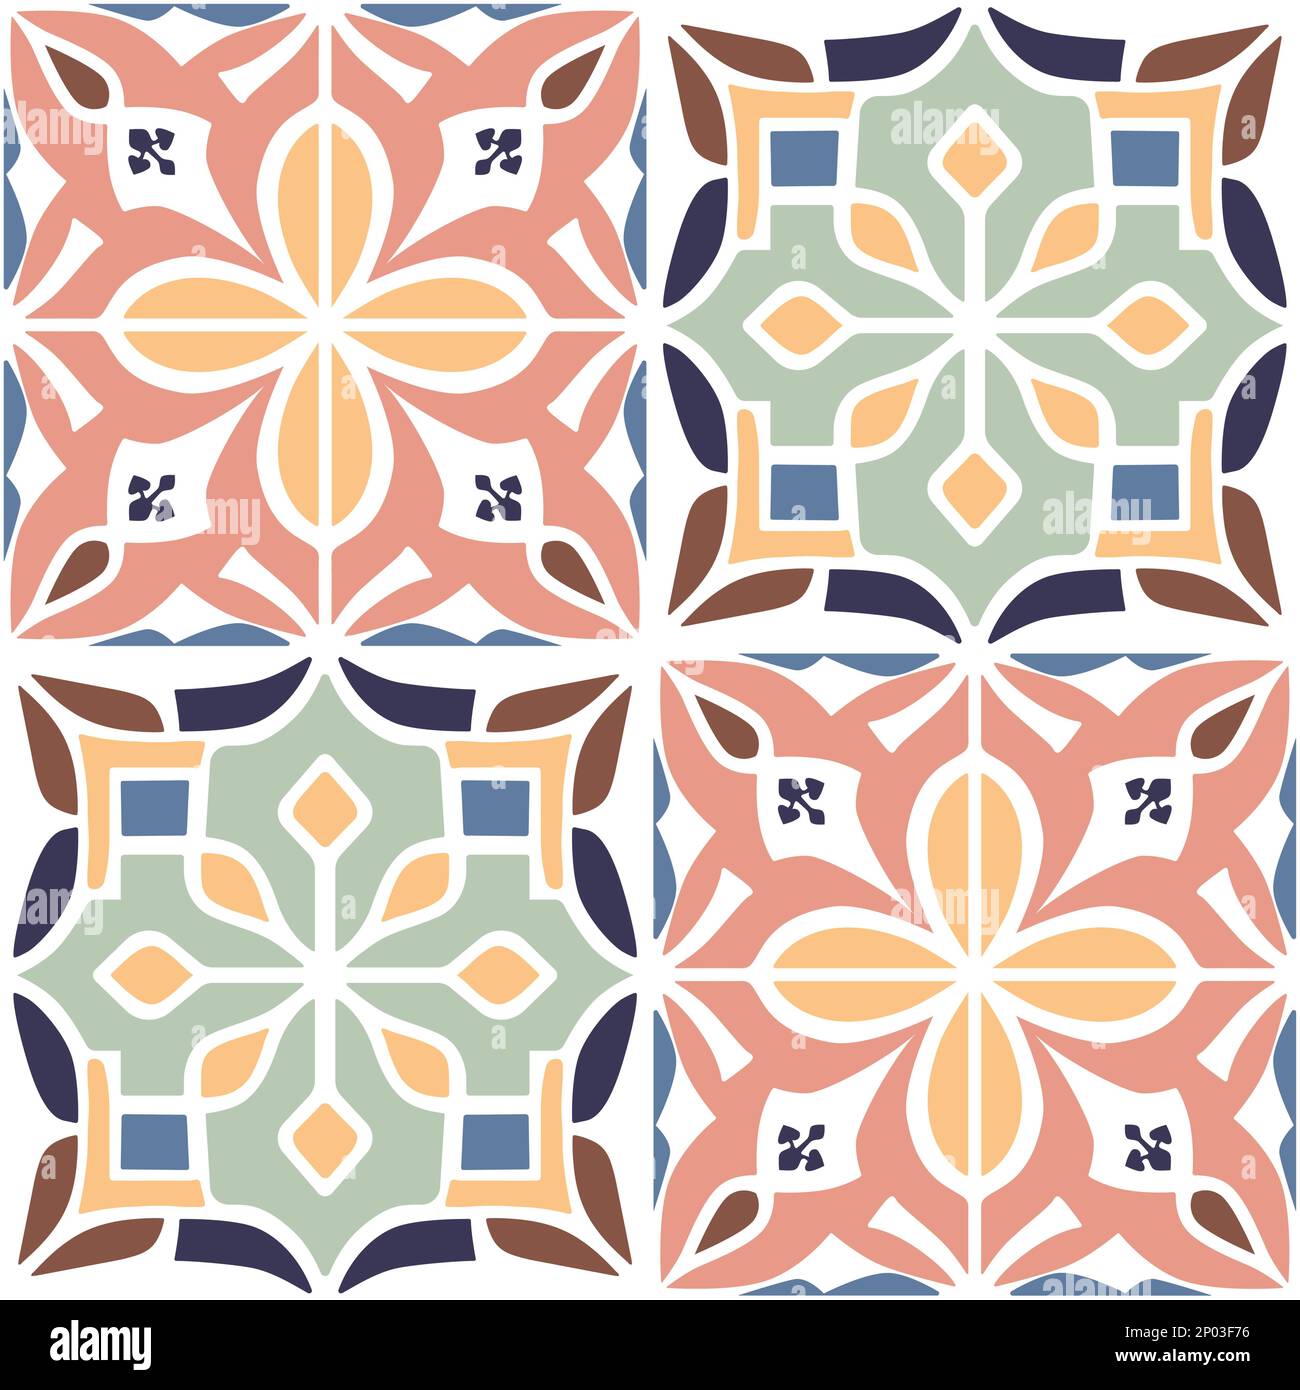 Vector Retro or Traditional Portuguese or Moroccan Style Flooring Tiles Seamless Surface Pattern for Background, Products or Wrapping Paper Prints. Stock Vector